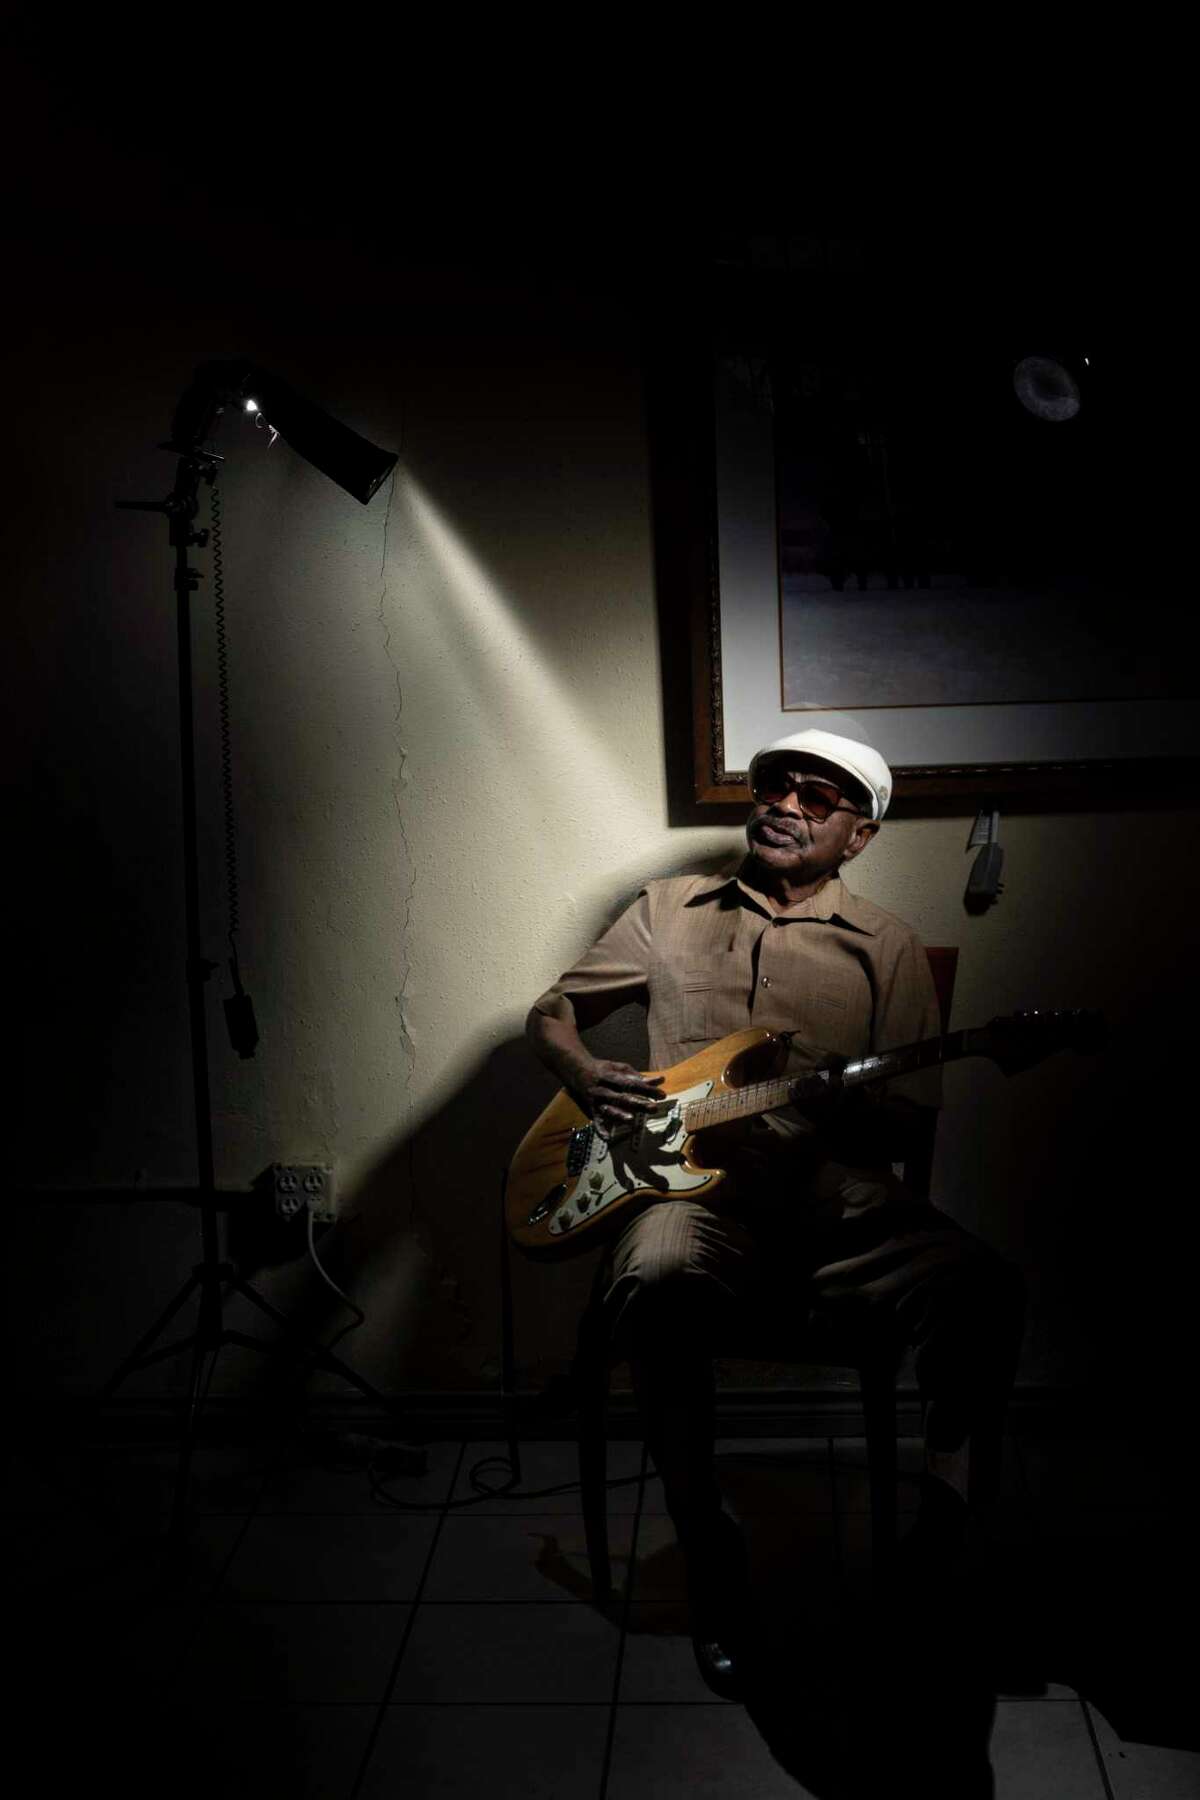 Legendary blues guitarist Curley Mays performed with stars such as Etta James and Nat King Cole at San Antonio's Eastwood Country Club, Las Vegas casinos and the fabled Apollo Theater. He is a regular at Panchos & Gringos, the East Side eatery.